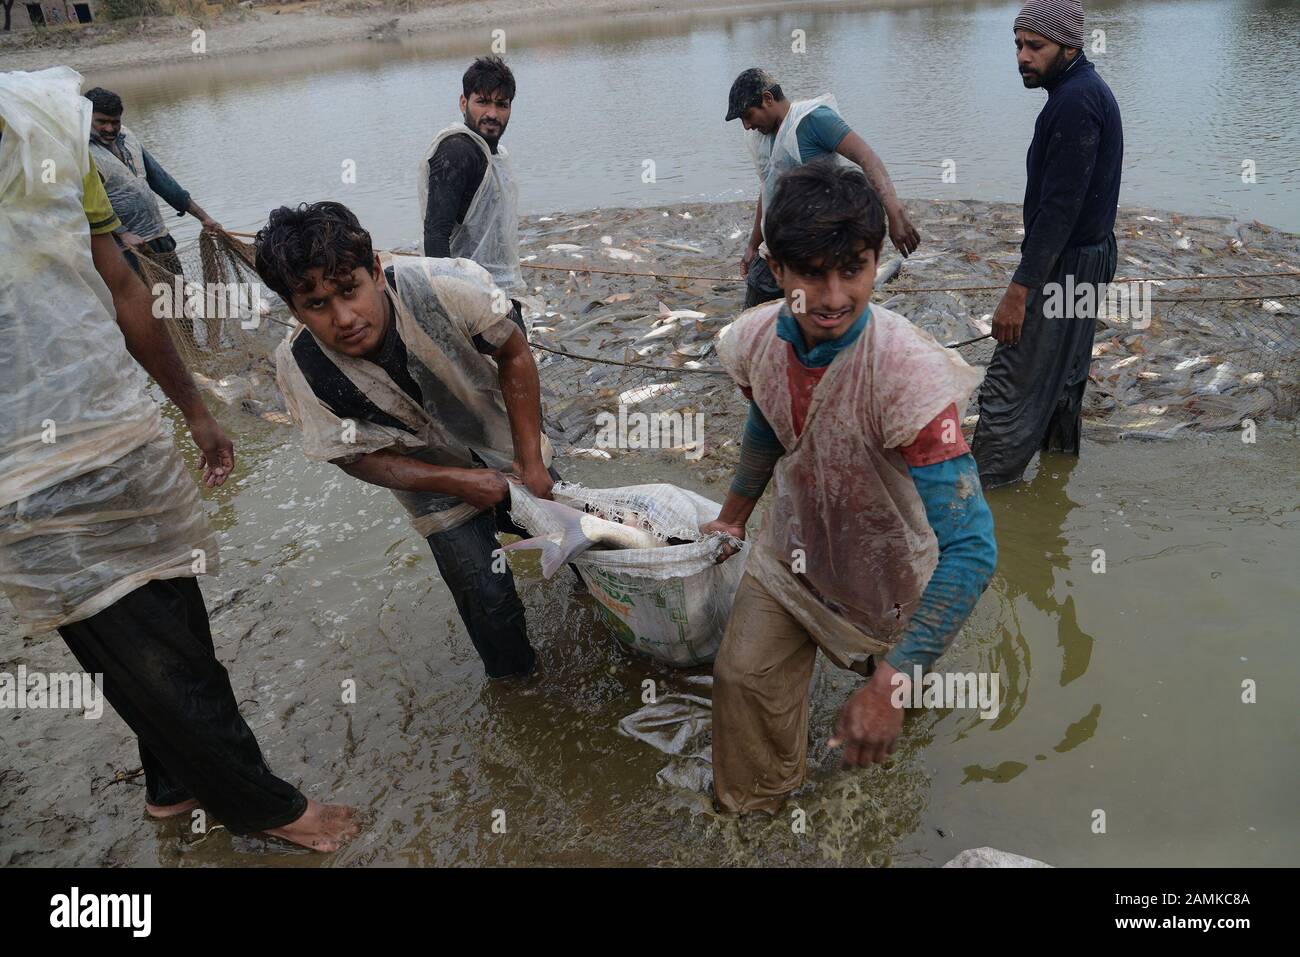 Pakistani fisherman catching fishes with net from fresh water in a ...